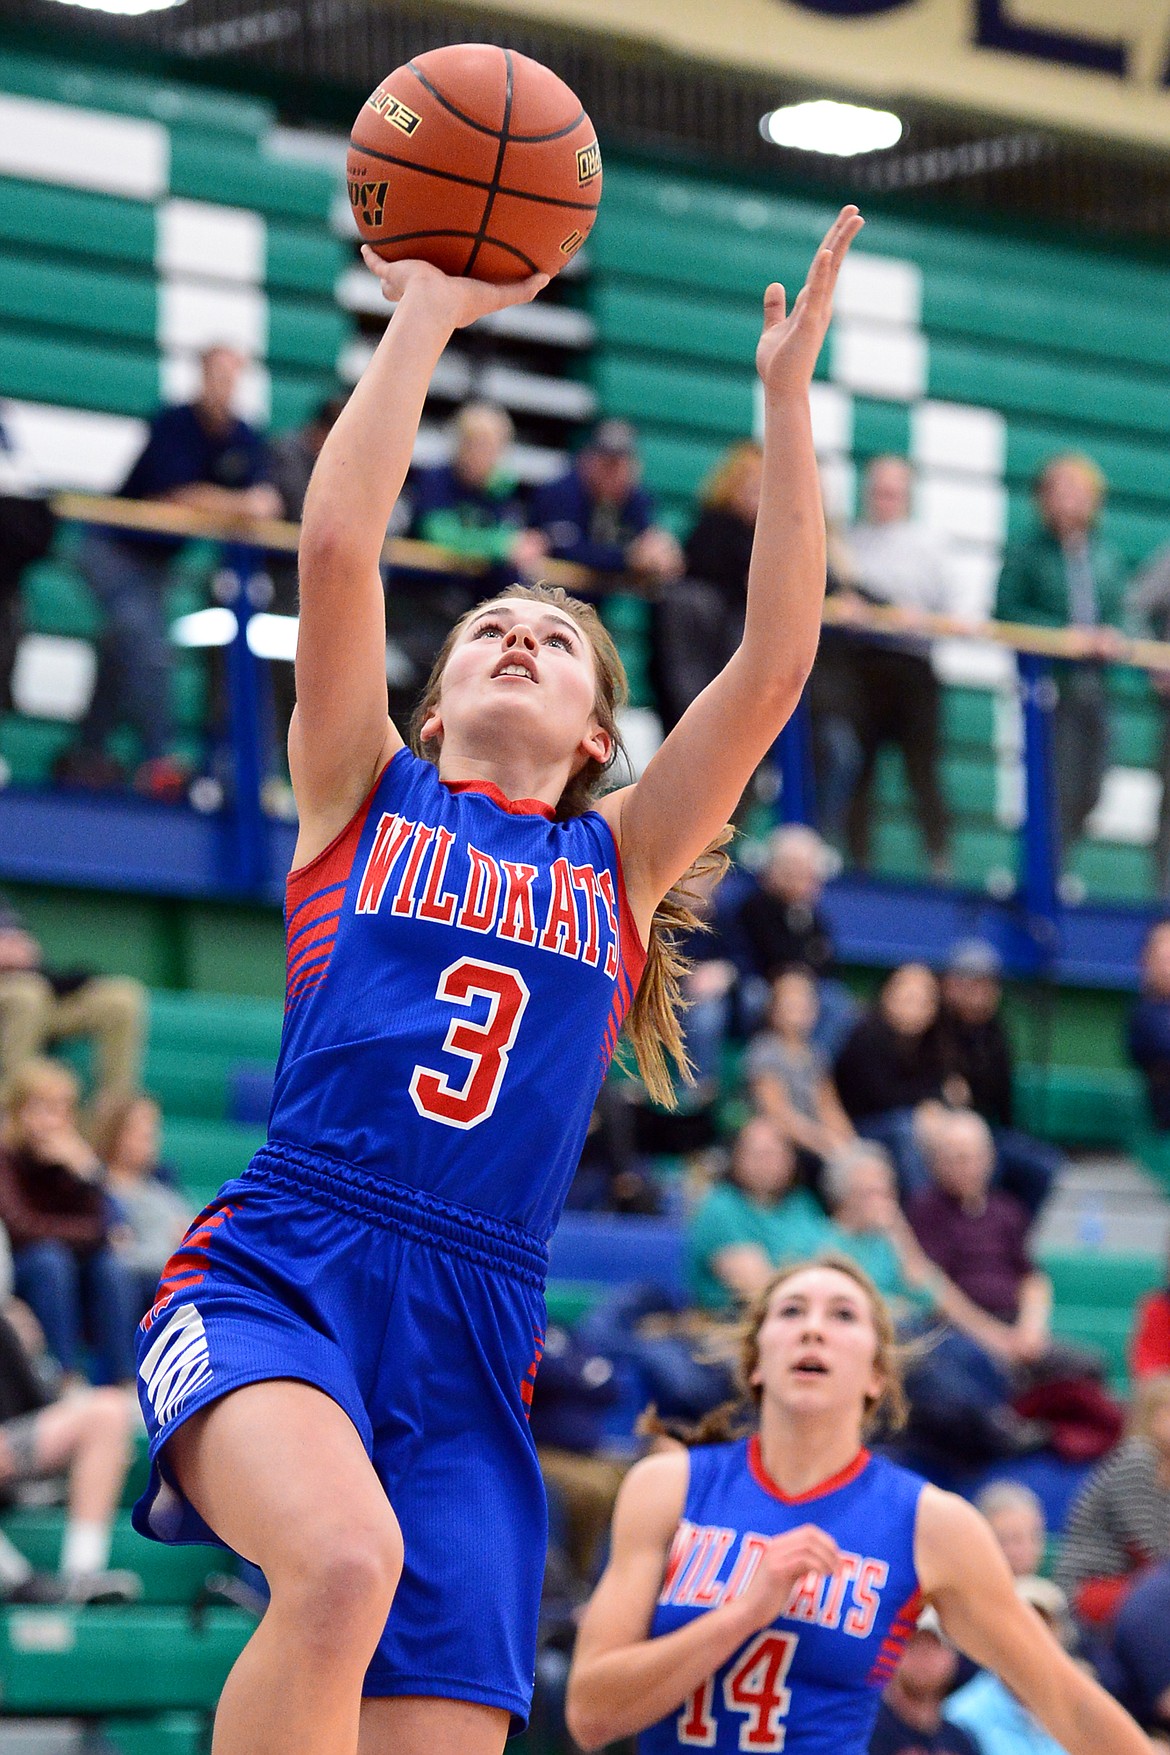 Columbia Falls' Maddie Robison heads to the hoop for a breakaway layup in the third quarter against Glacier at Glacier High School on Thursday. (Casey Kreider/Daily Inter Lake)